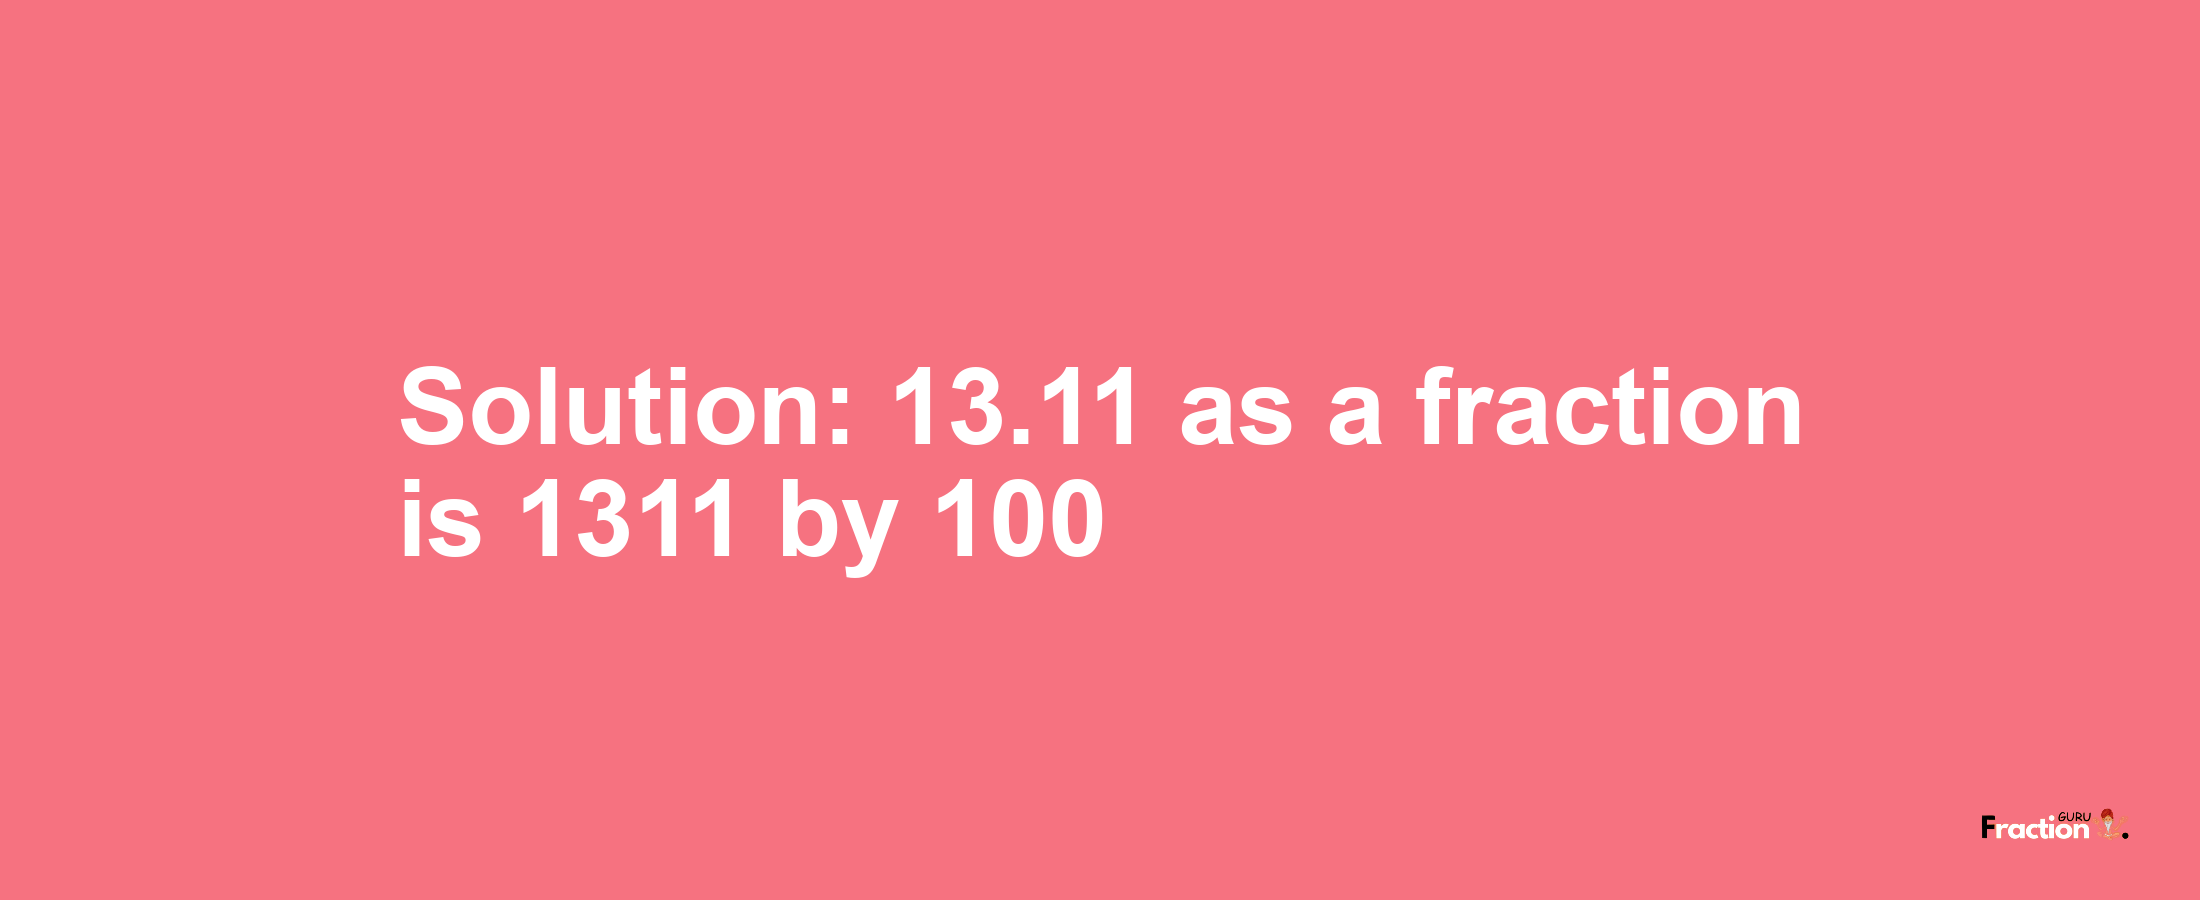 Solution:13.11 as a fraction is 1311/100